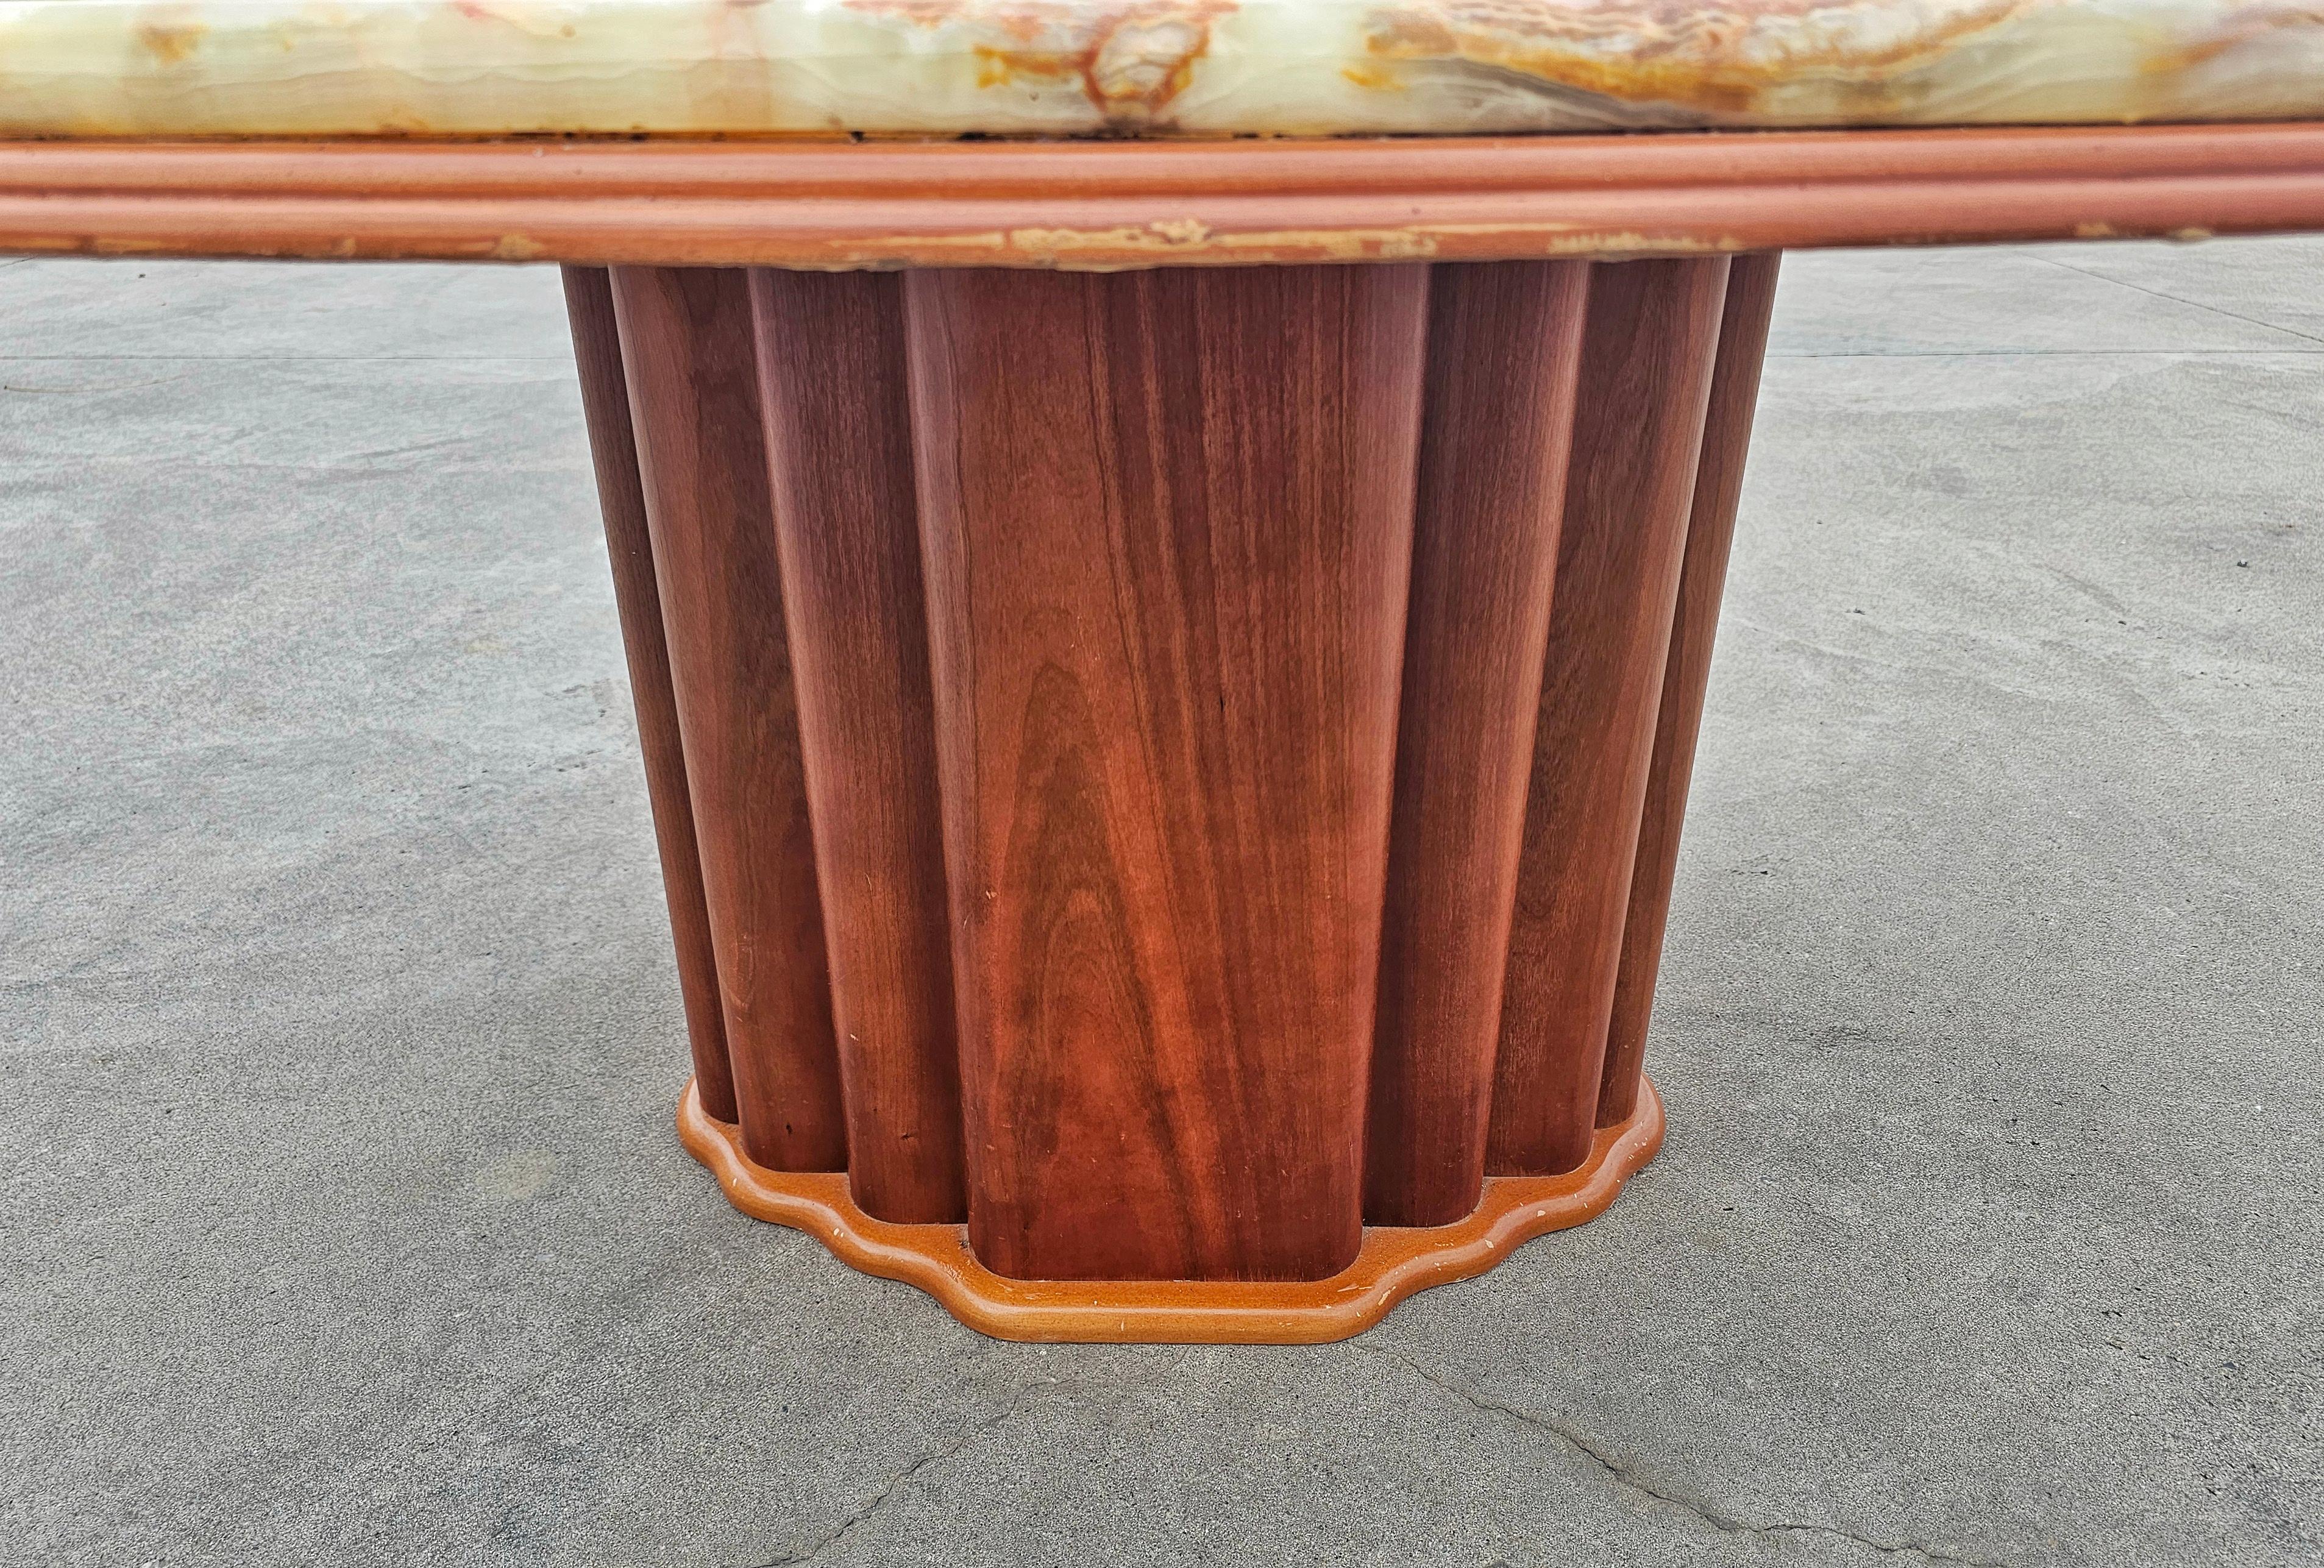 Art Deco Inspired Coffee Table with Onyx Top by Hohnert Design, Germany 1970s For Sale 5